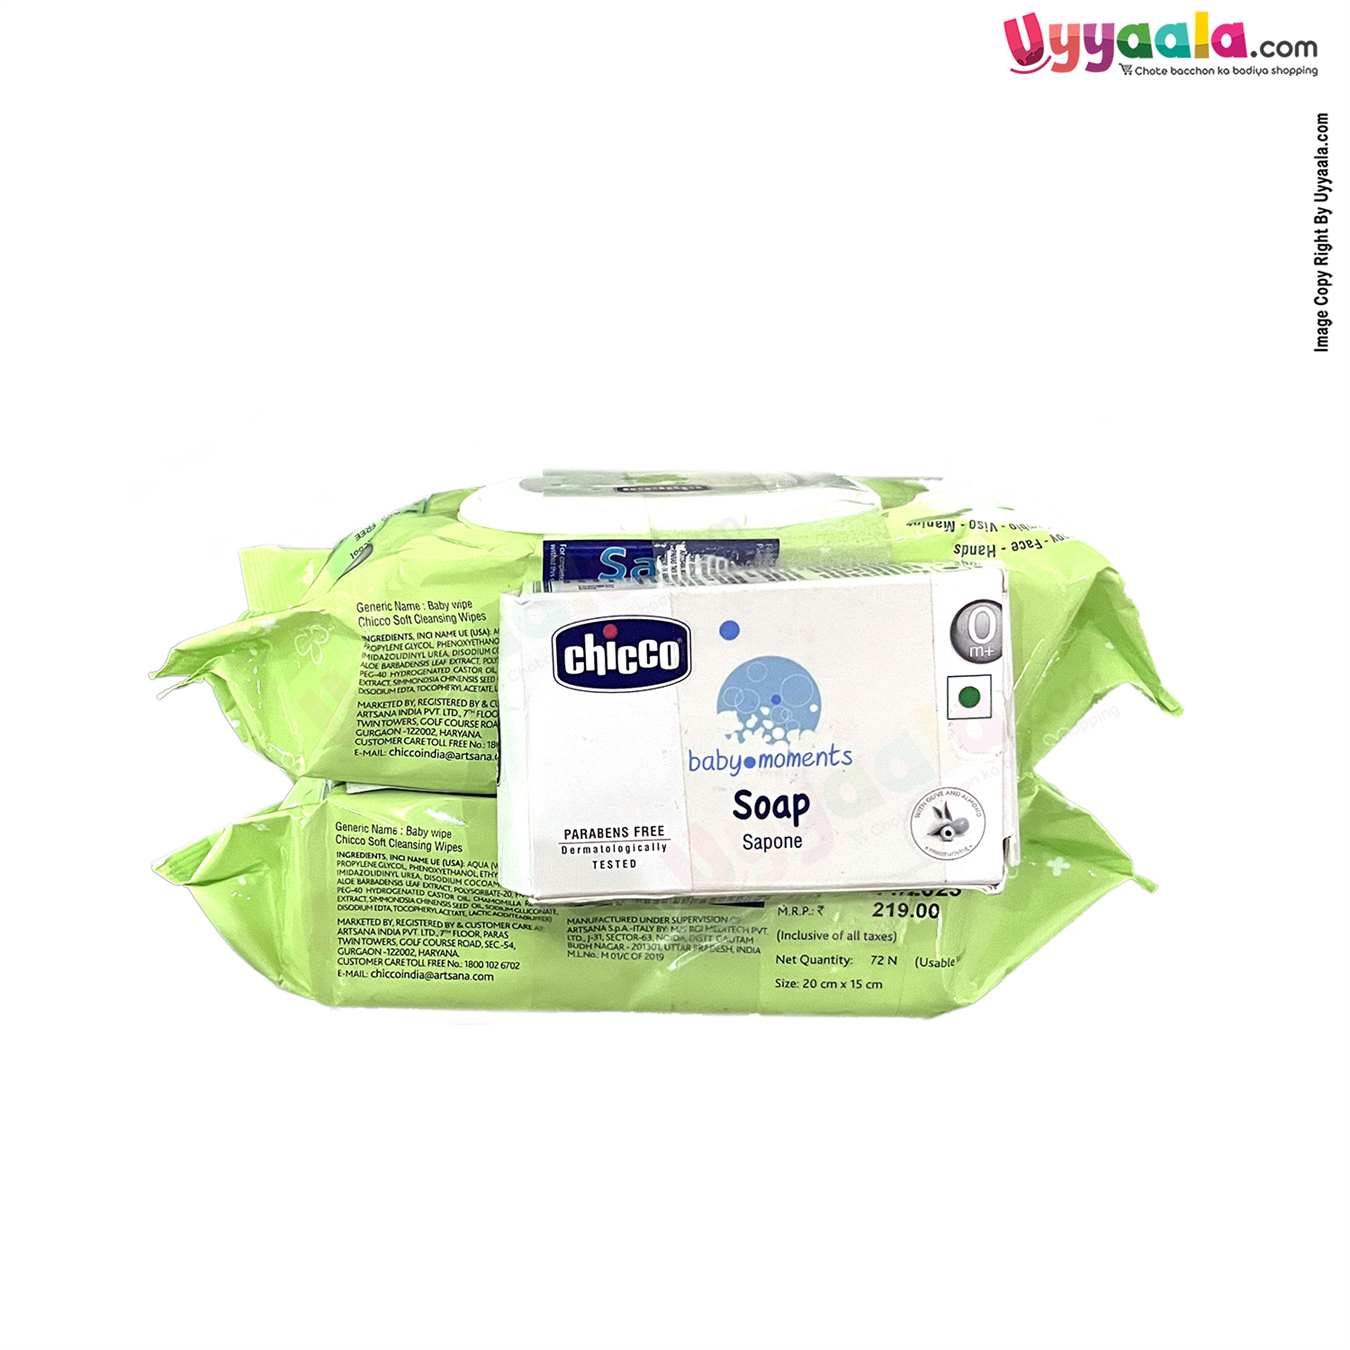 PIGEON Baby Skincare Wipes - 3Pack - 72pcs each